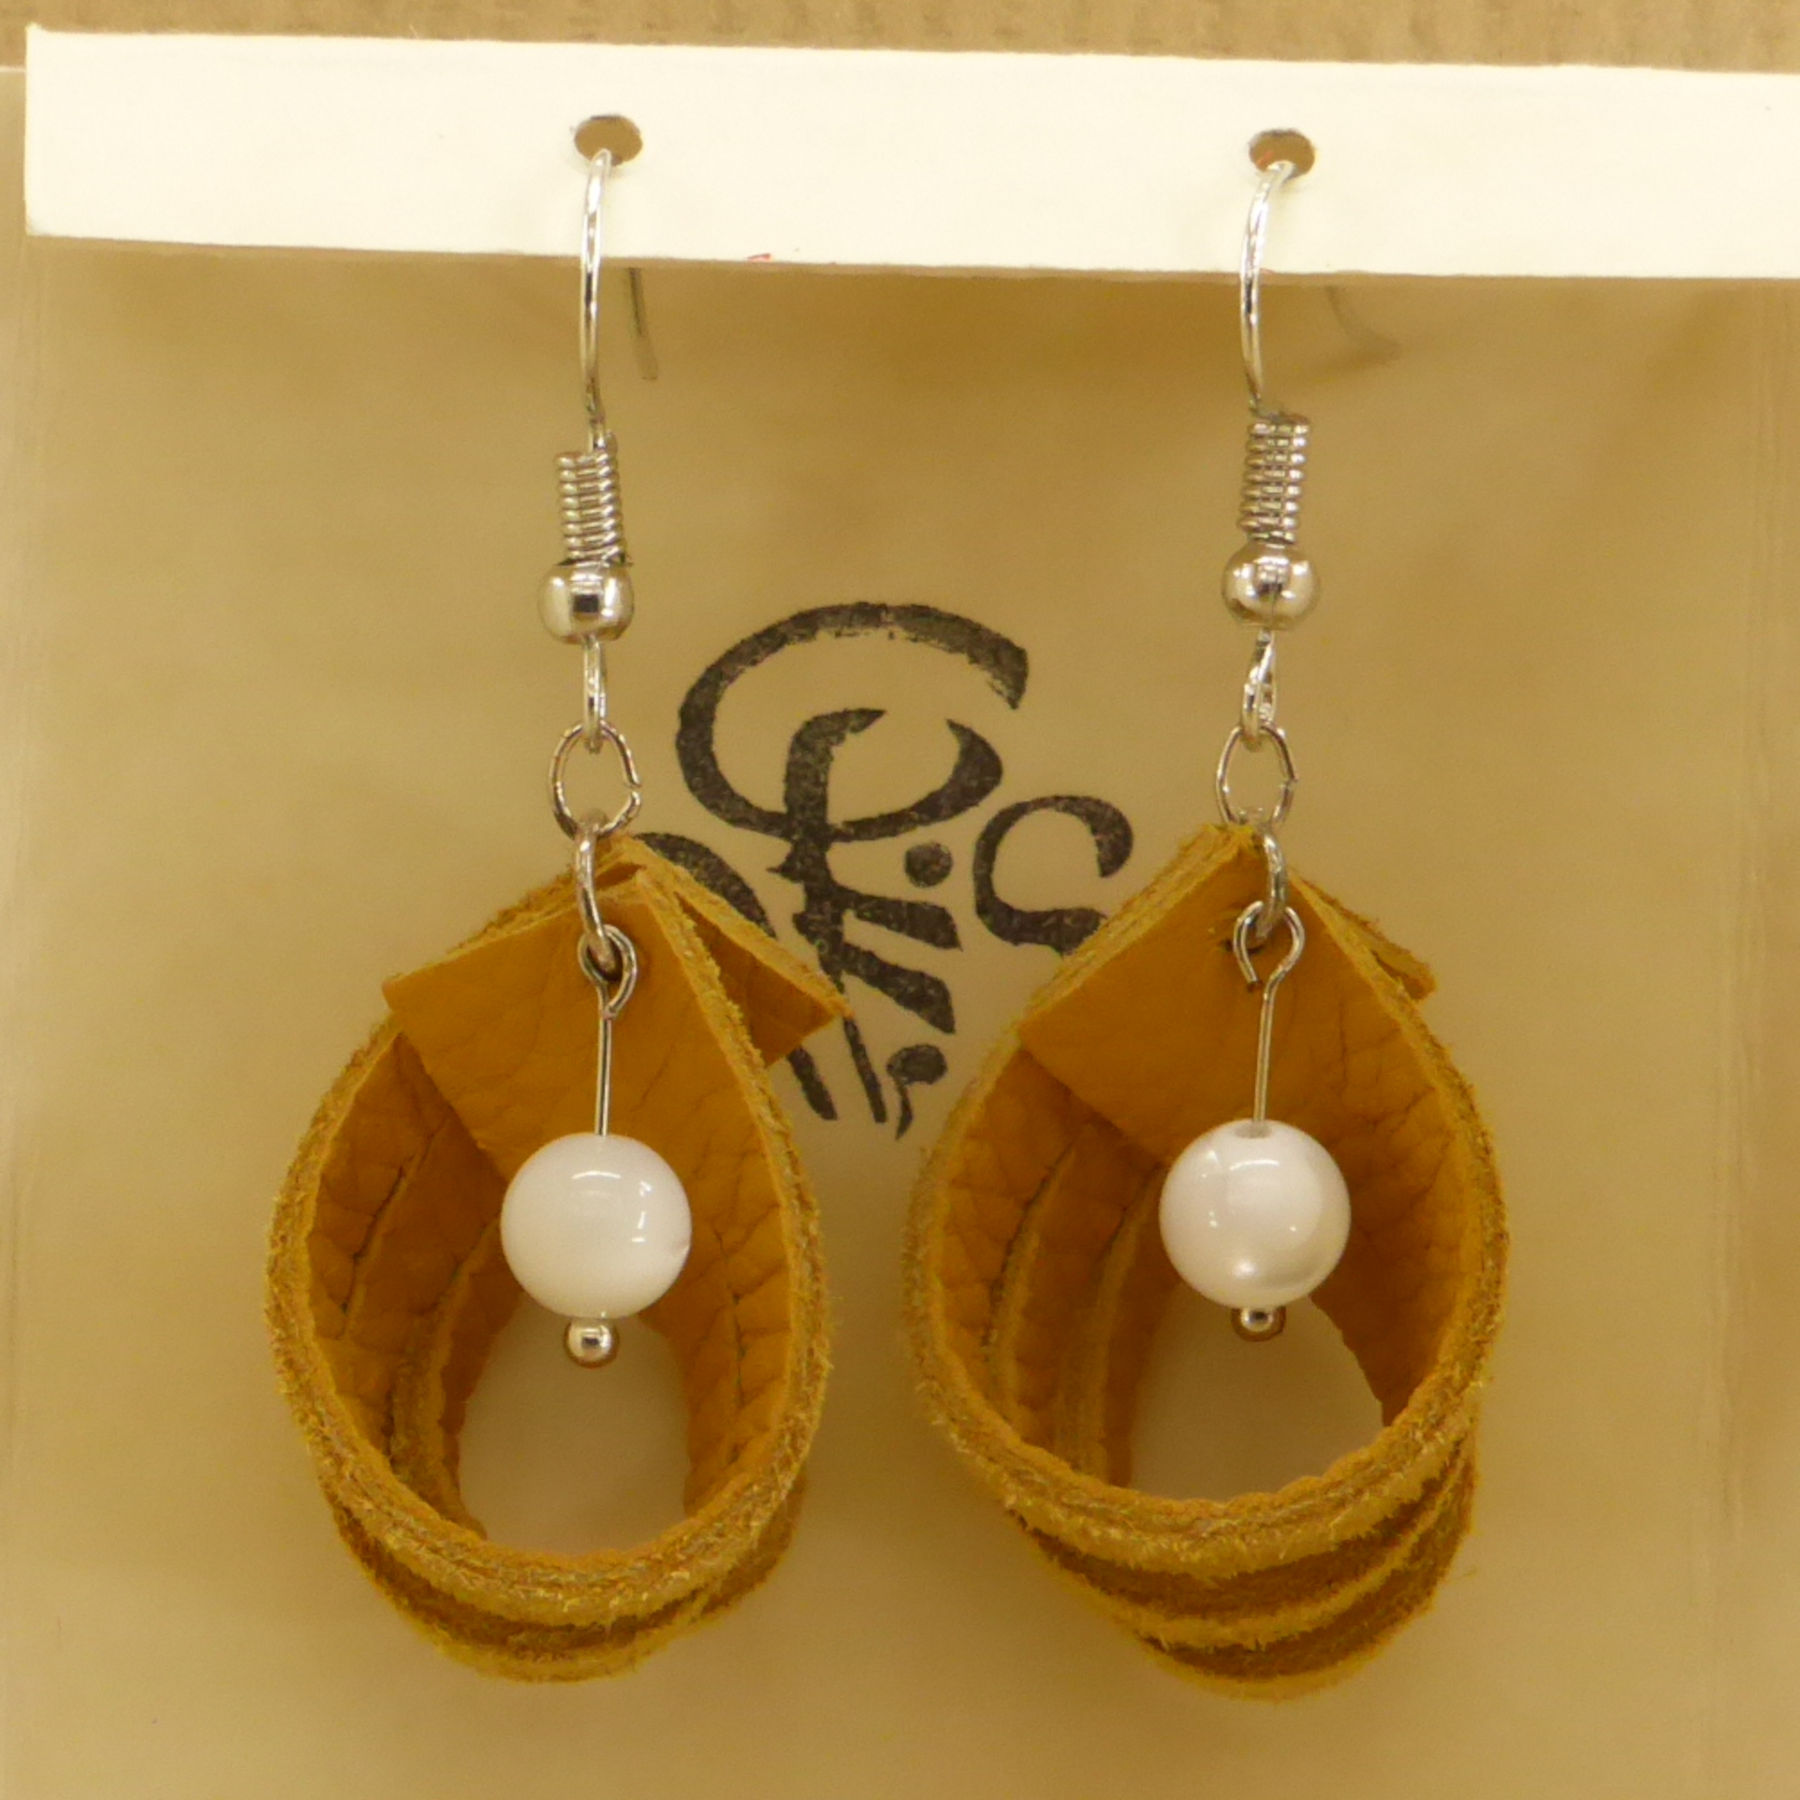 Yellow leather earring with 3 coiled bands and mother-of-pearl